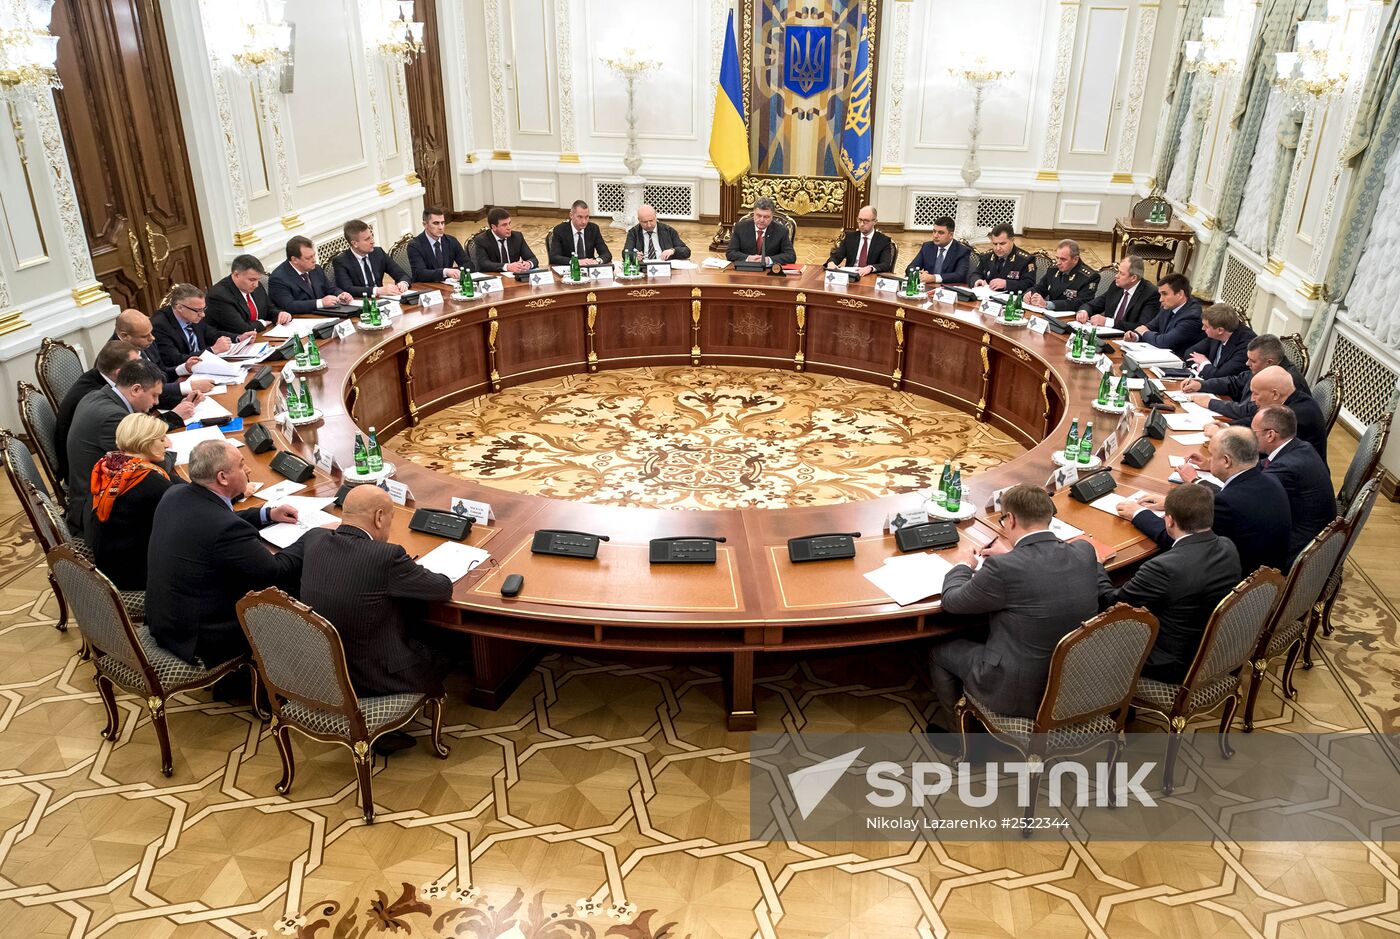 Ukrainian President Poroshenko holds meeting of Security and Defense Council